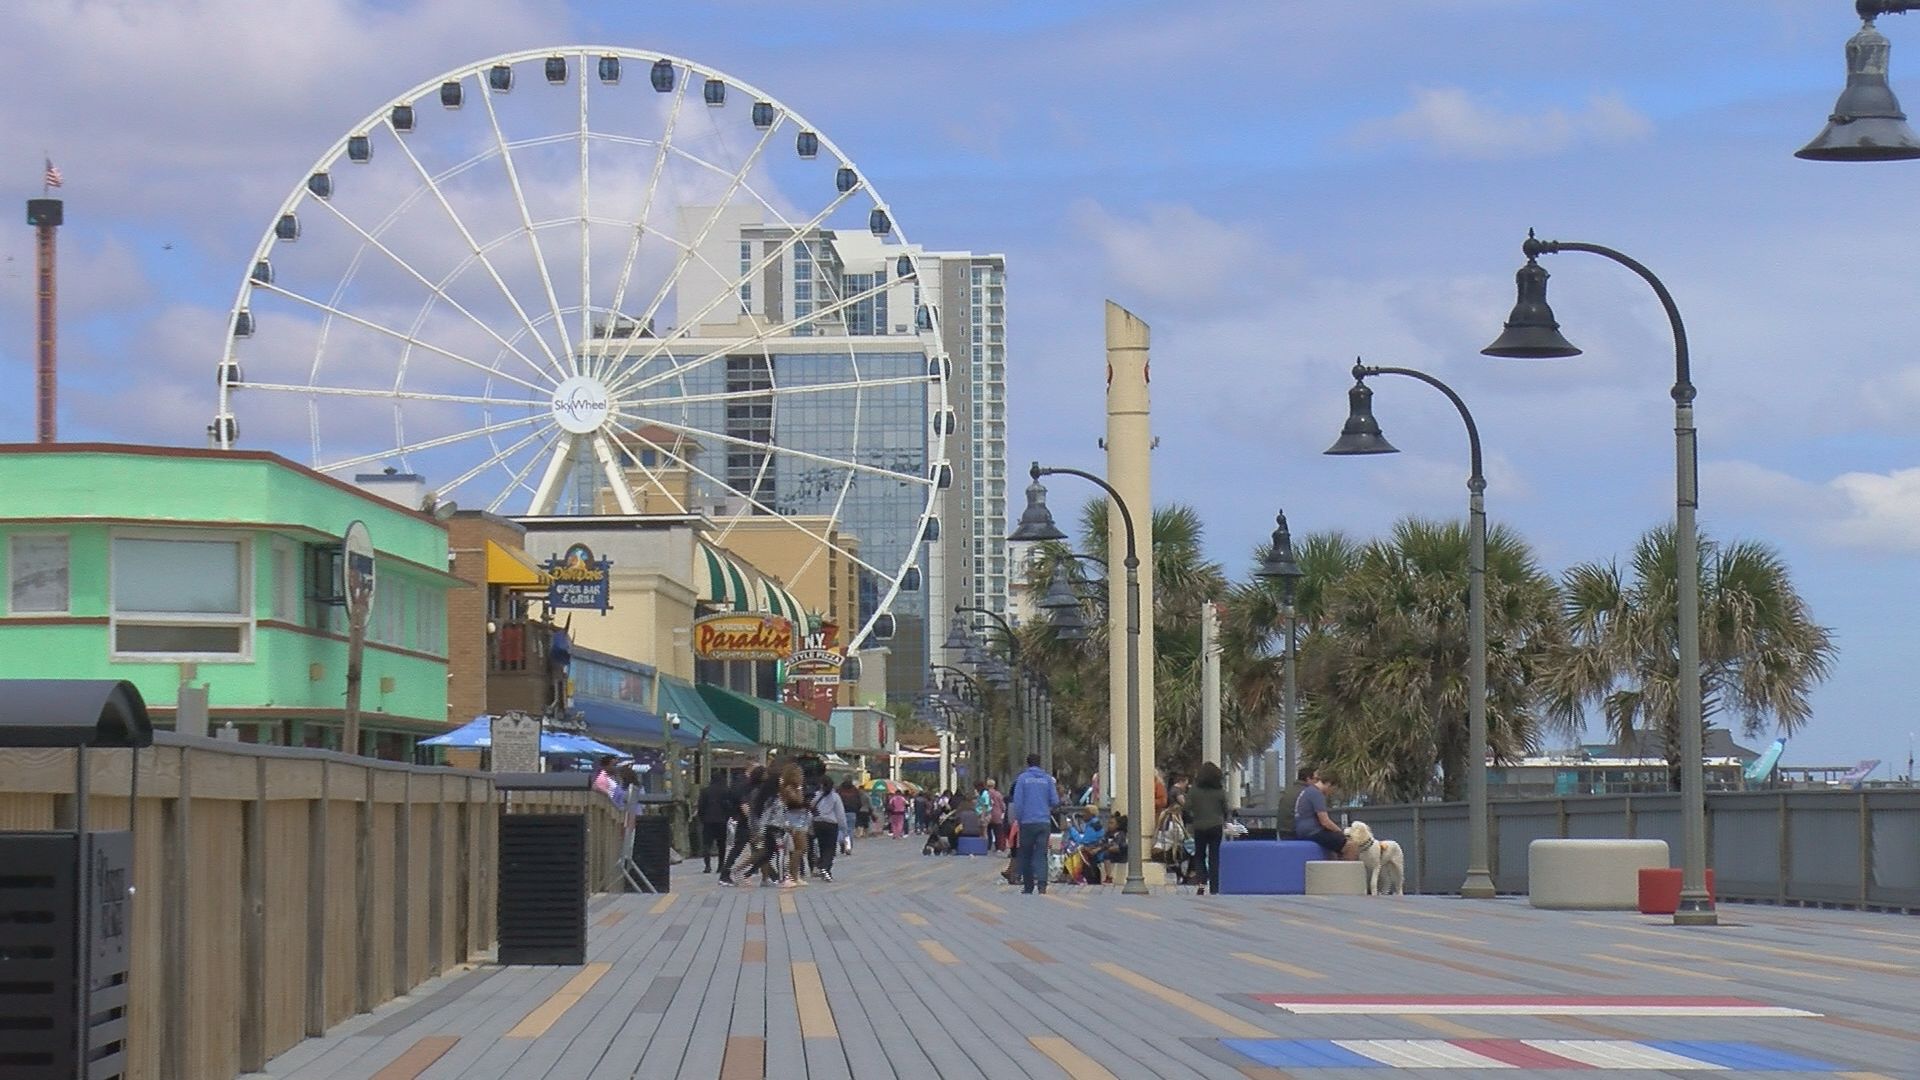 Myrtle Beach ready to woo Canadians back - Travelweek